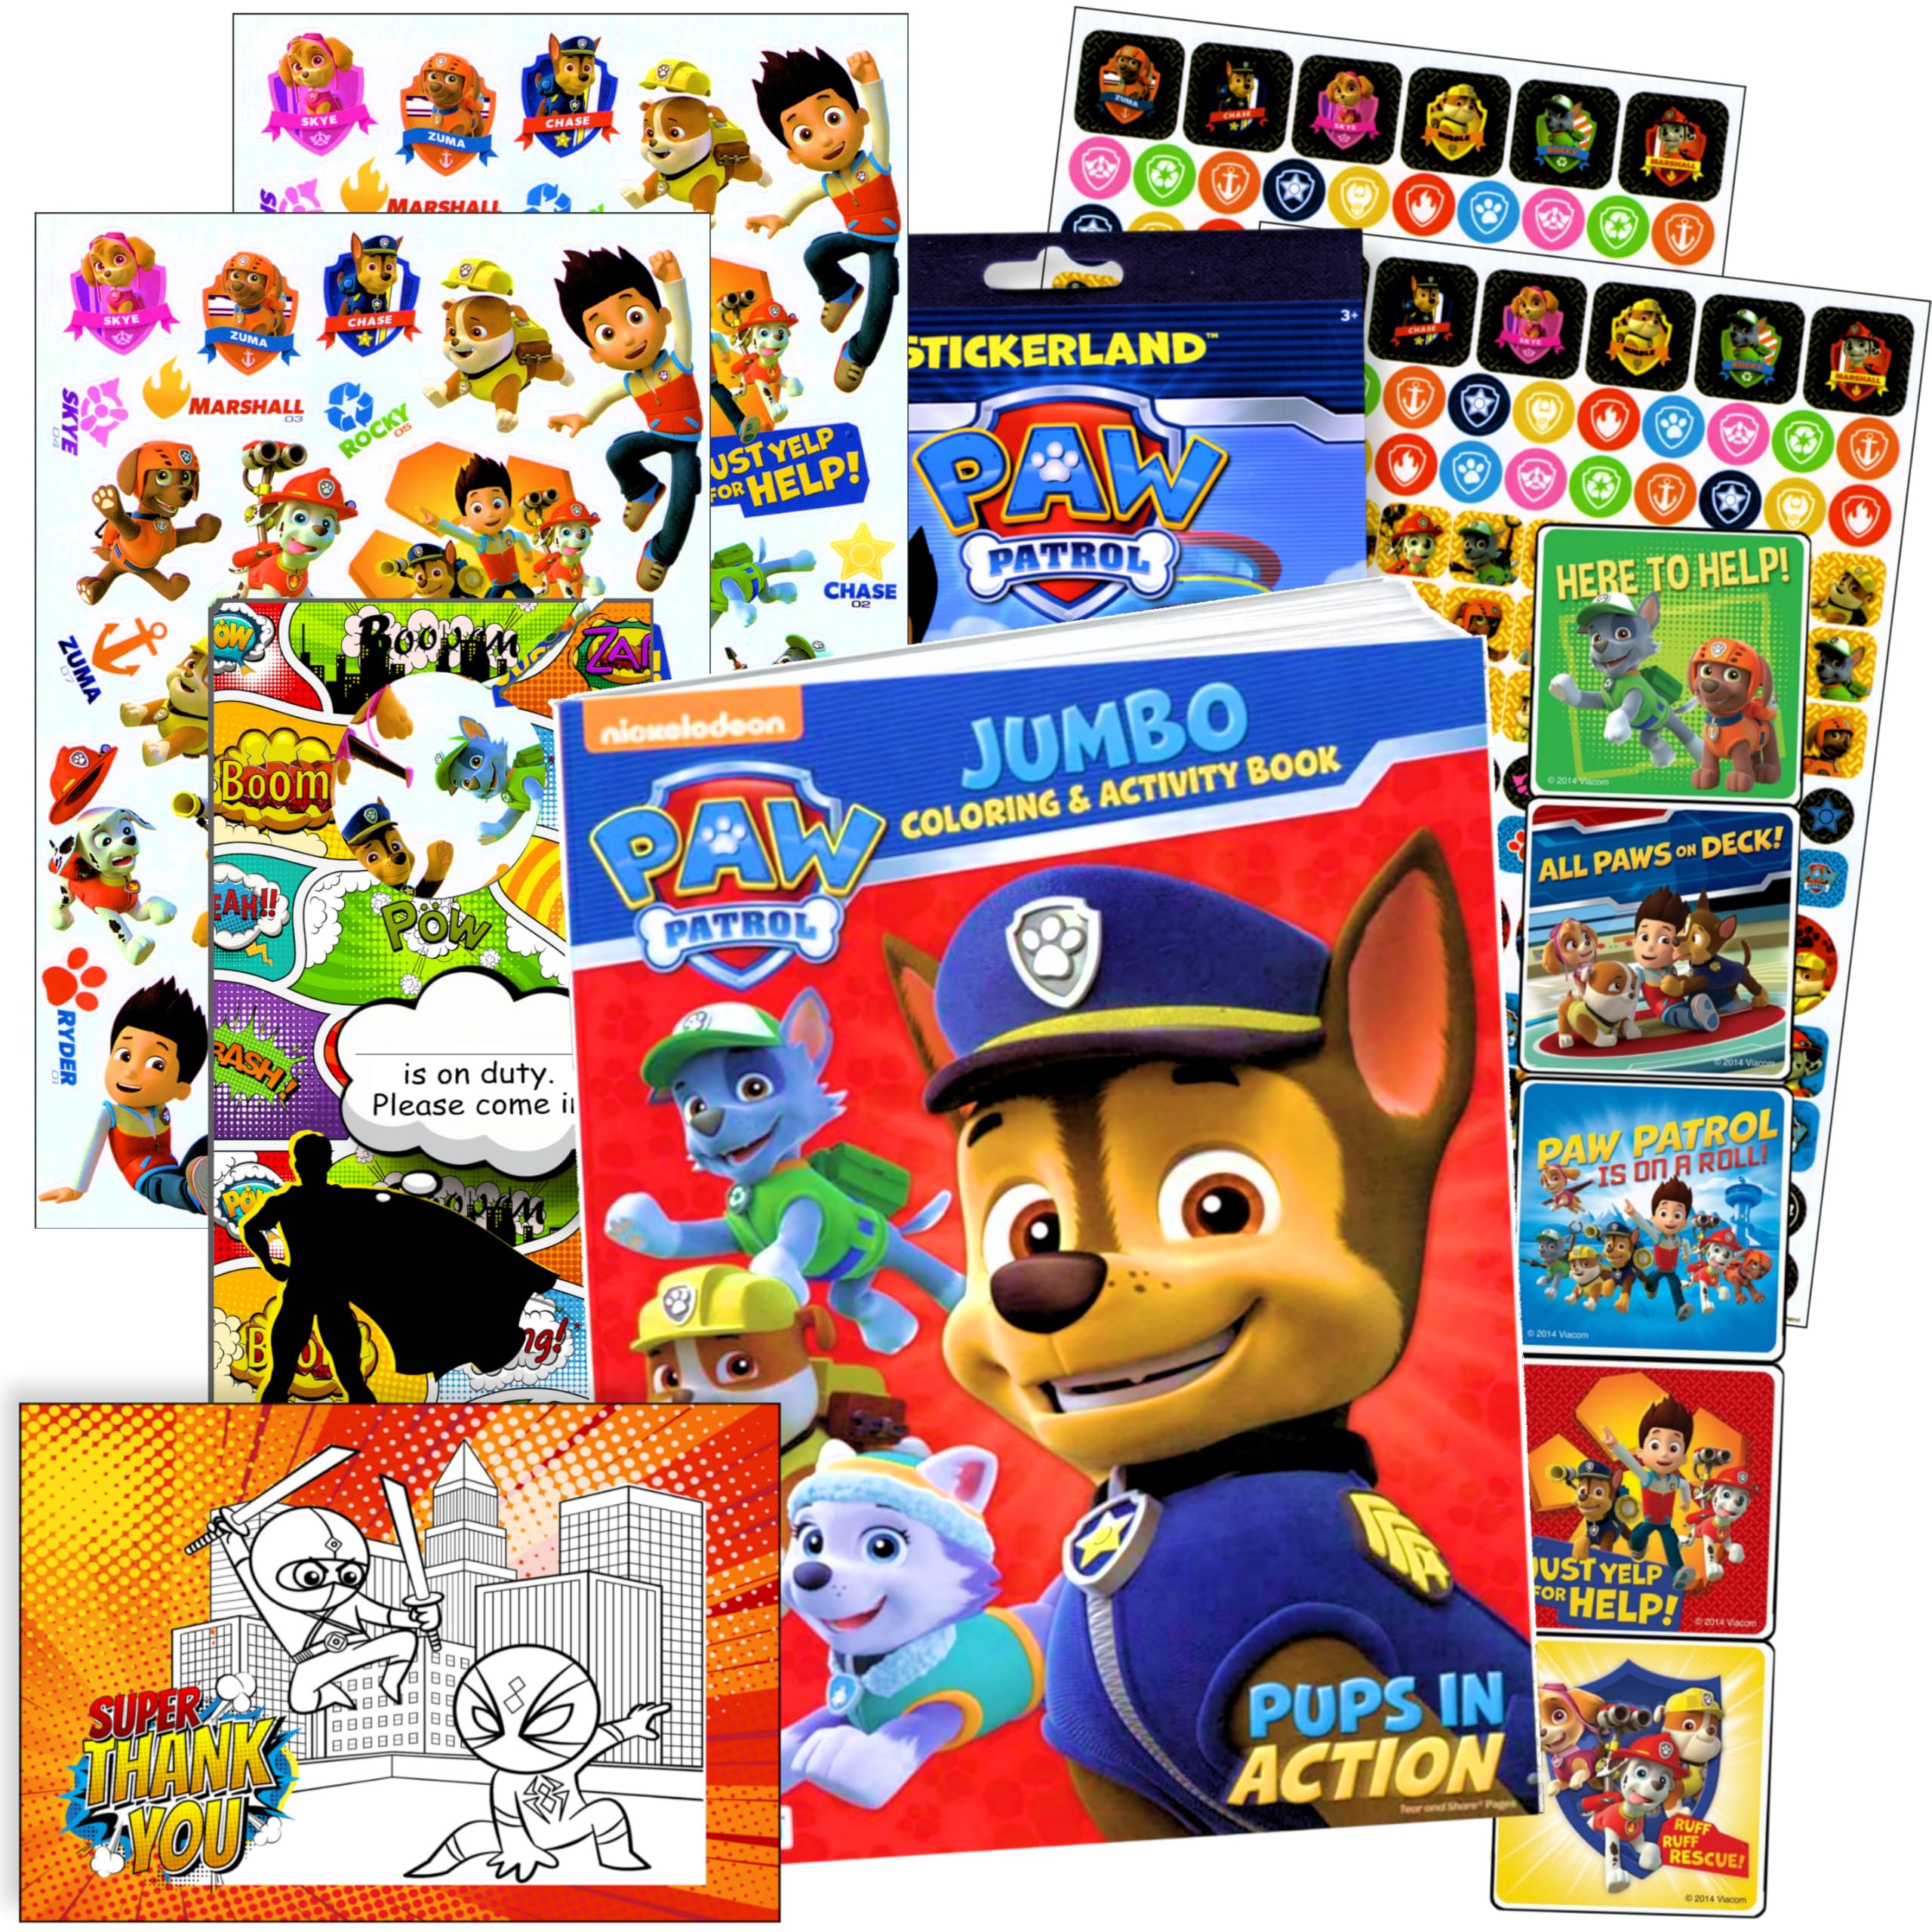 Paw patrol coloring book and stickers